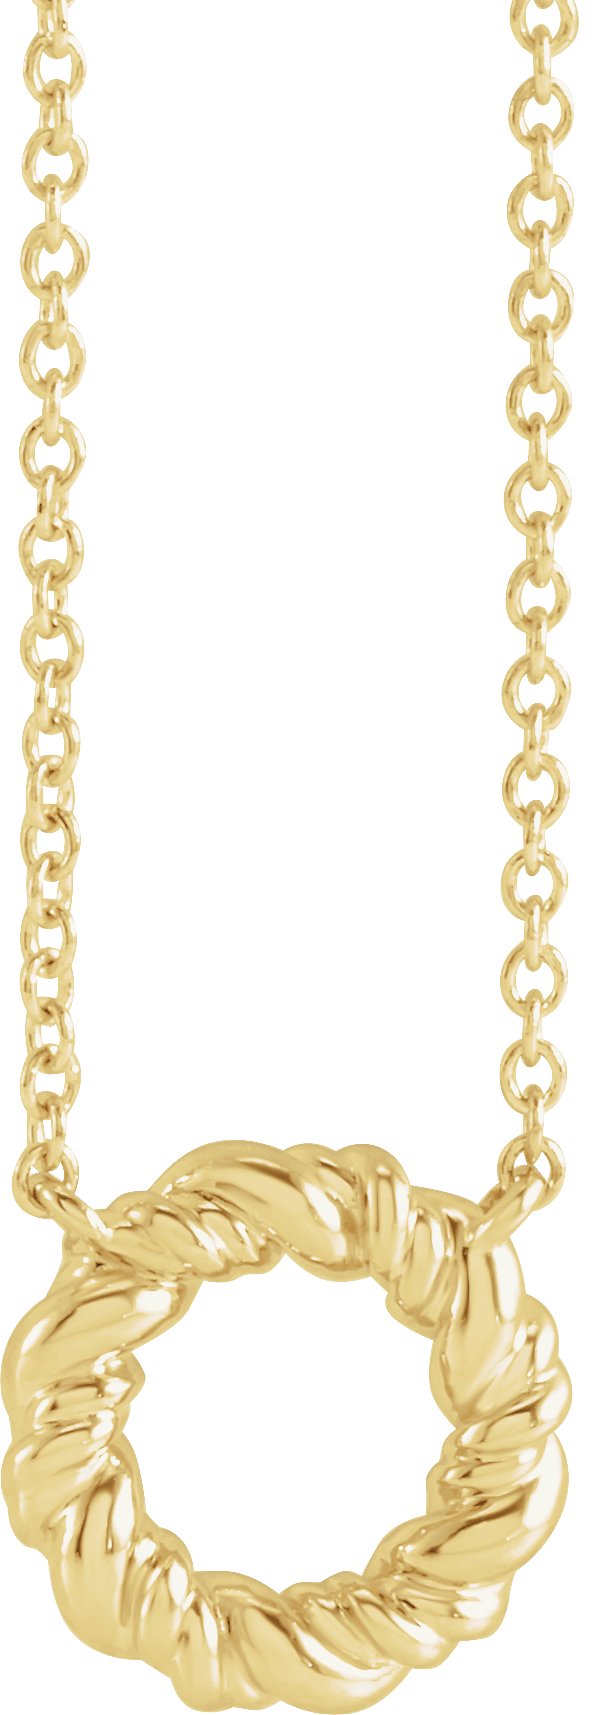 14K Yellow 9.4 mm Rope Circle 18" Necklace